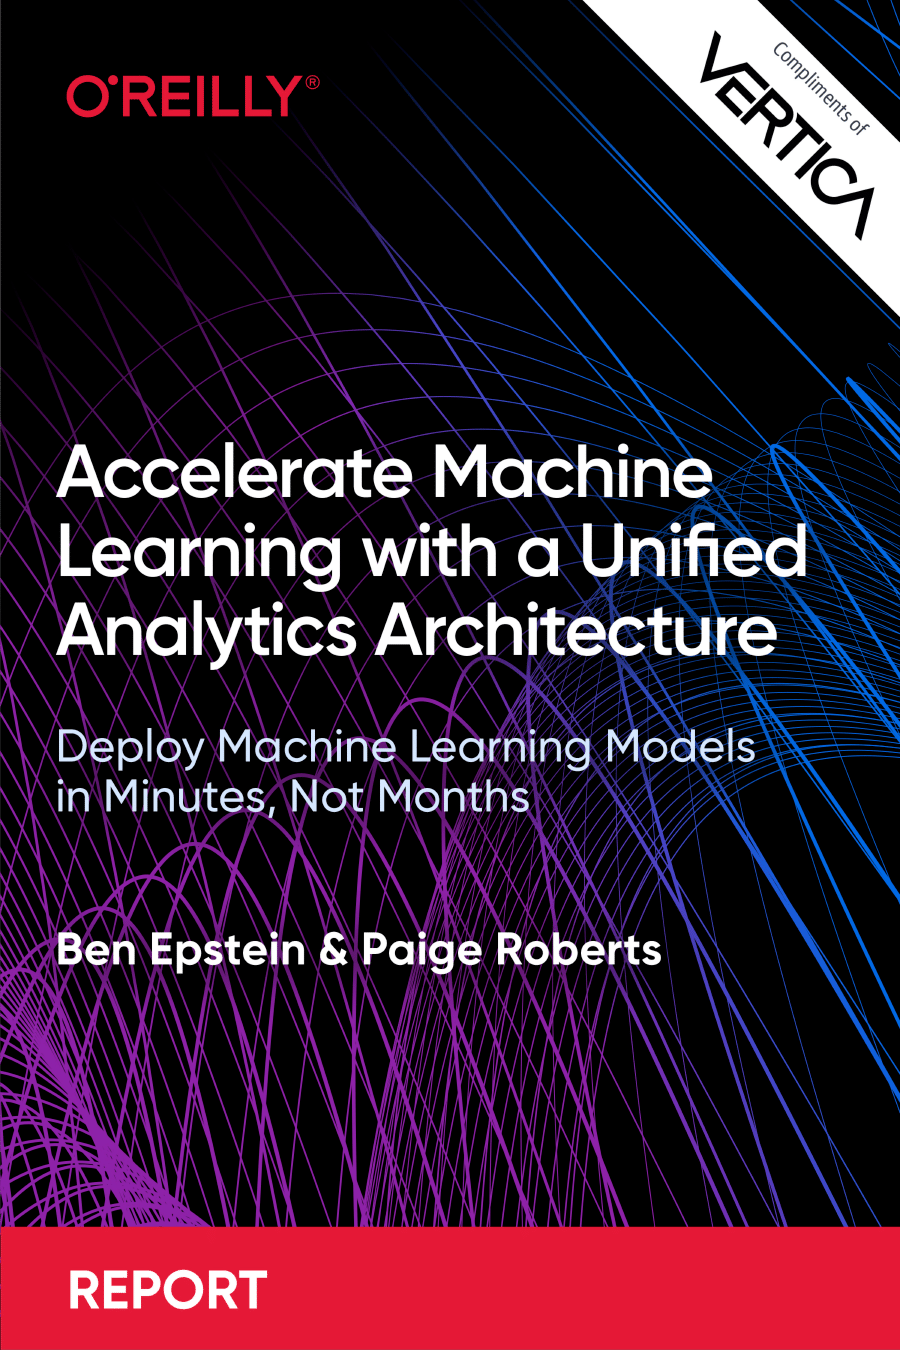 Acclerate Machine Learning with Unified Analytics e-book